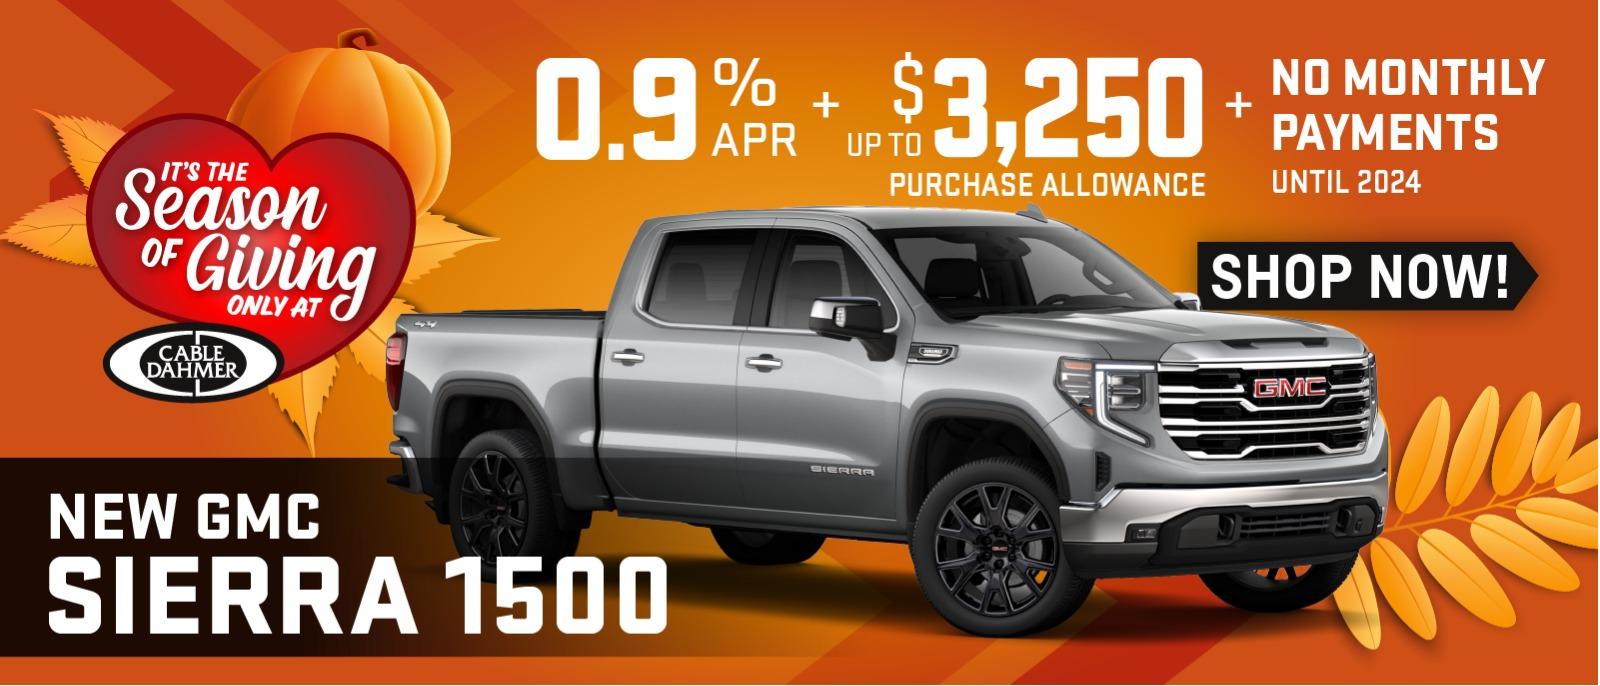 GMC Sierra 1500 for 0.9% APR and up to $3,250 purchase allowance